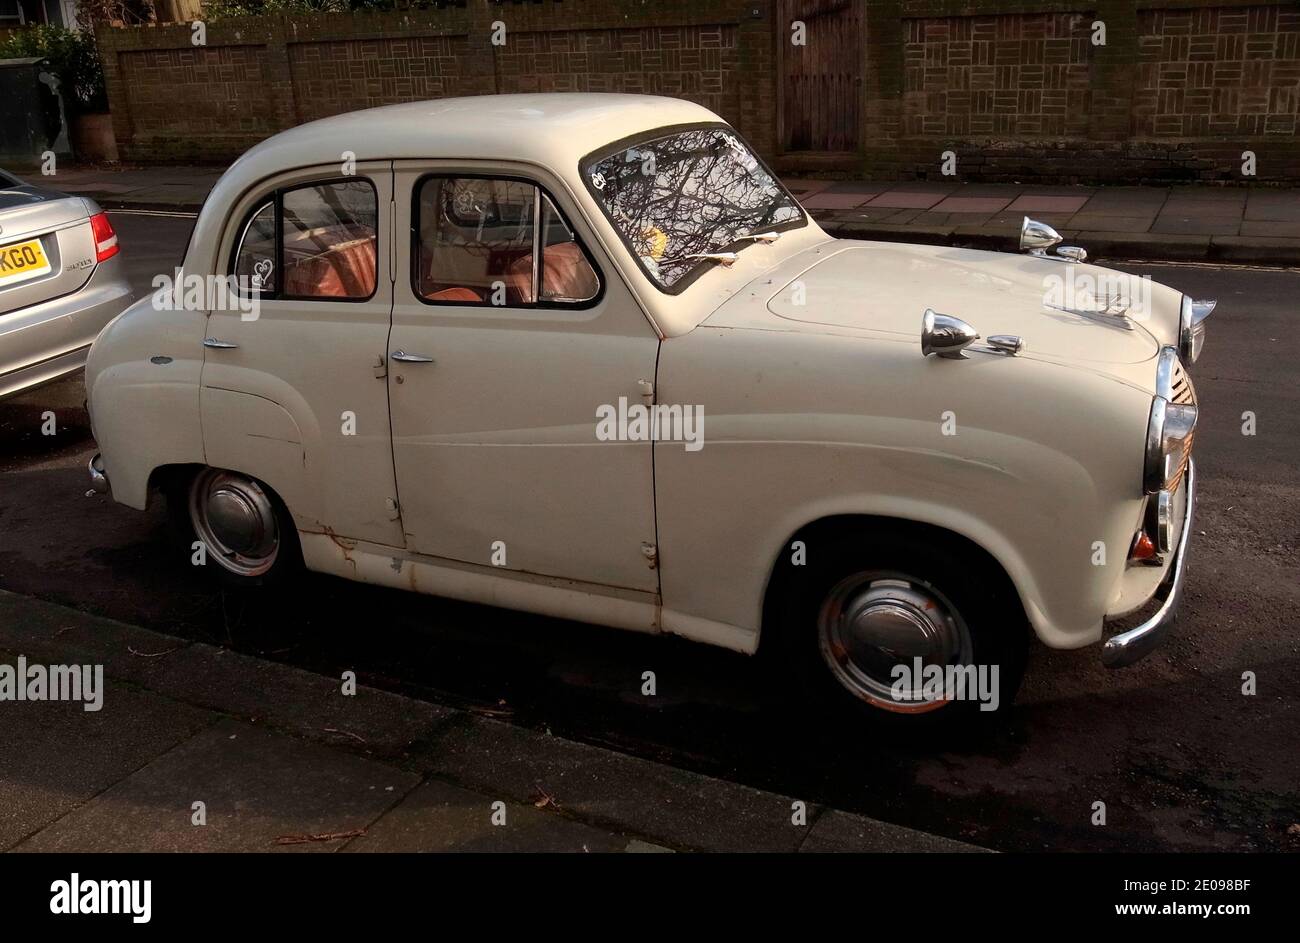 AJAXNETPHOTO. 2020. WORTHING, ENGLAND. - SMALL FAMILY - AUSTIN A30 4CYL ENGINED FAMILY SALOON CAR MANUFACTURED BETWEEN 1952 AND 1956 DESIGNED BY RICARDO BURZI PARKED IN RESIDENTIAL STREET.PHOTO:JONATHAN EASTLAND/AJAX REF:GR202204 9851 Stock Photo